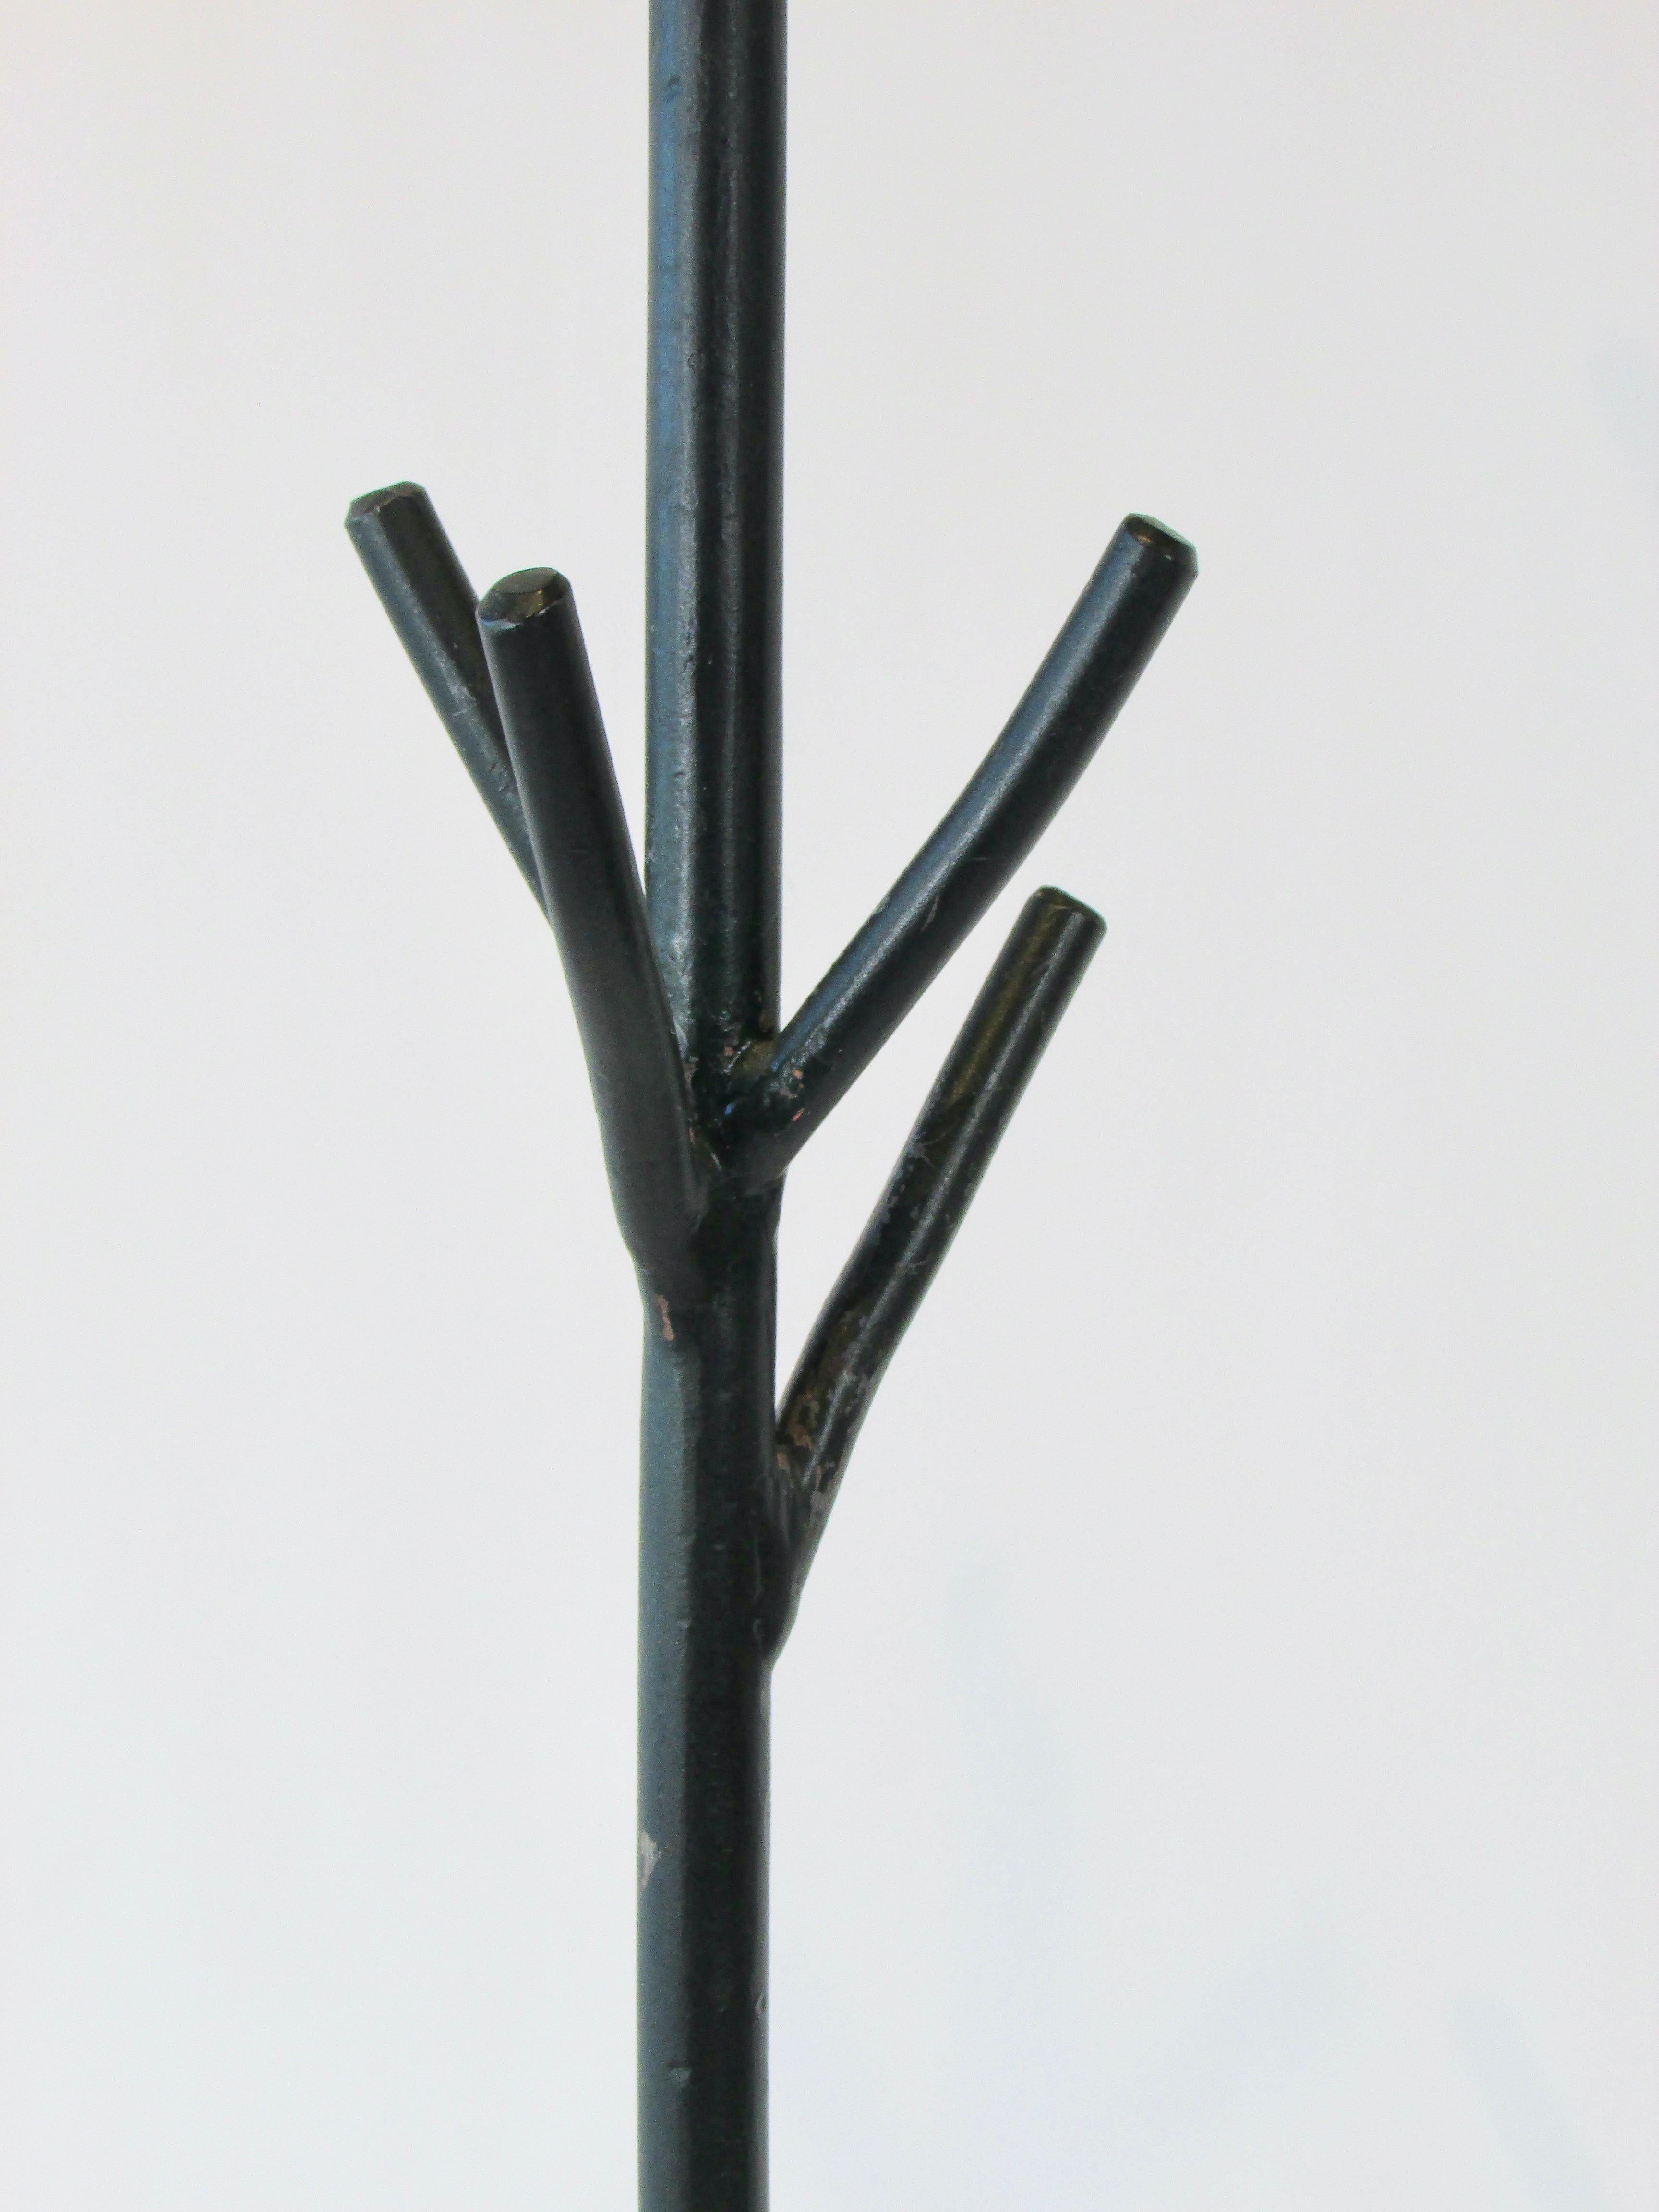 American Organic Welded Wrought Iron Tree Branch Sculptural Hat or Coat Rack For Sale